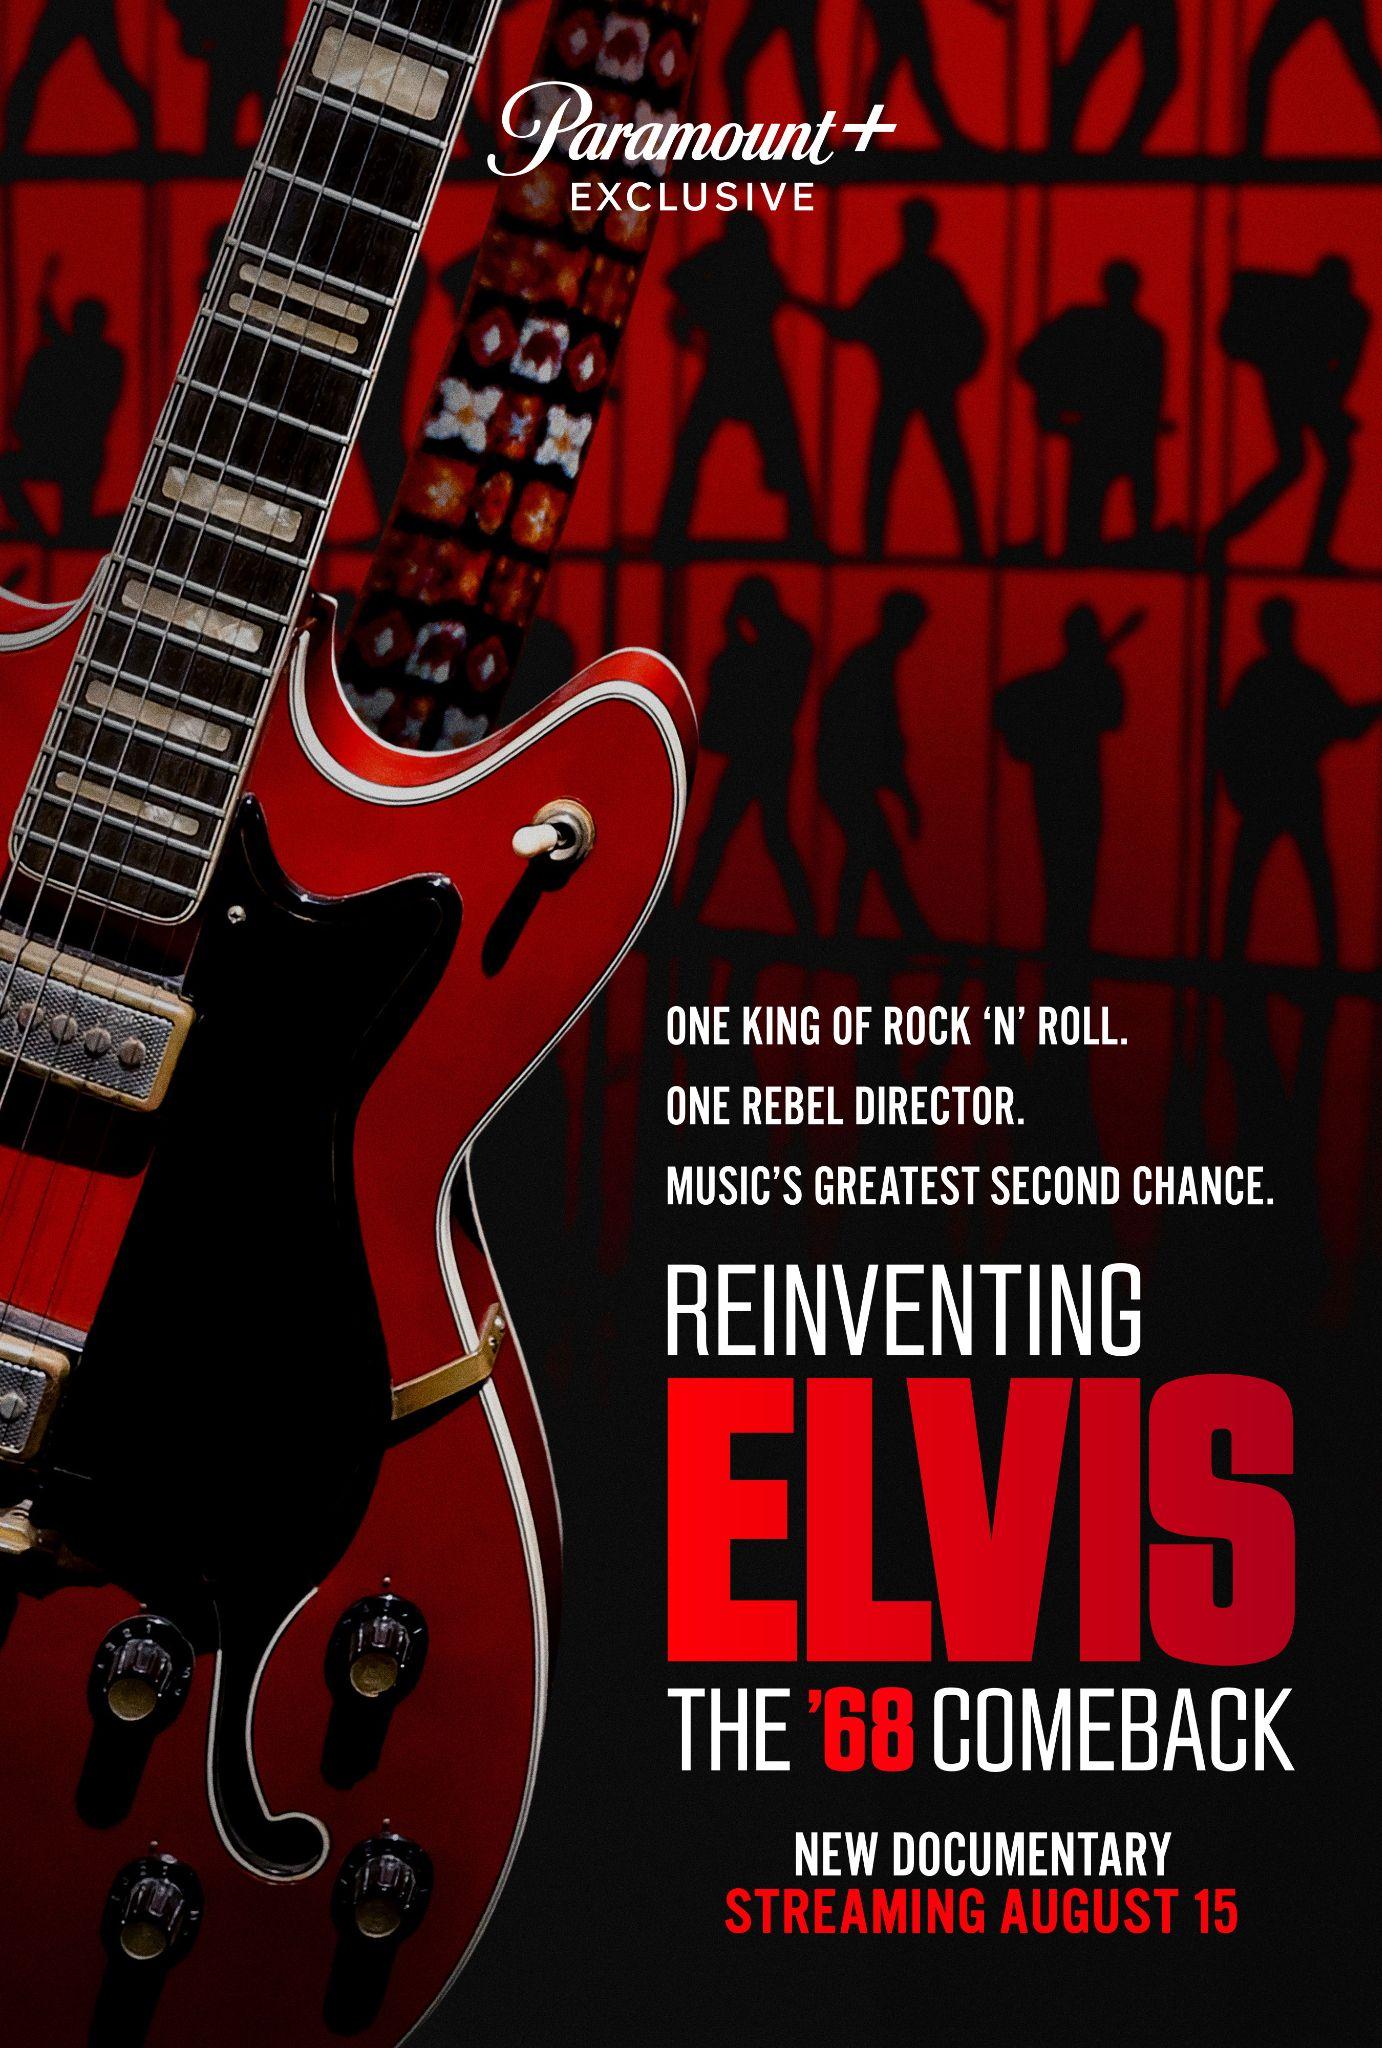 NickALive! Paramount+ to Premiere Reinventing Elvis The 68 Comeback on August 15